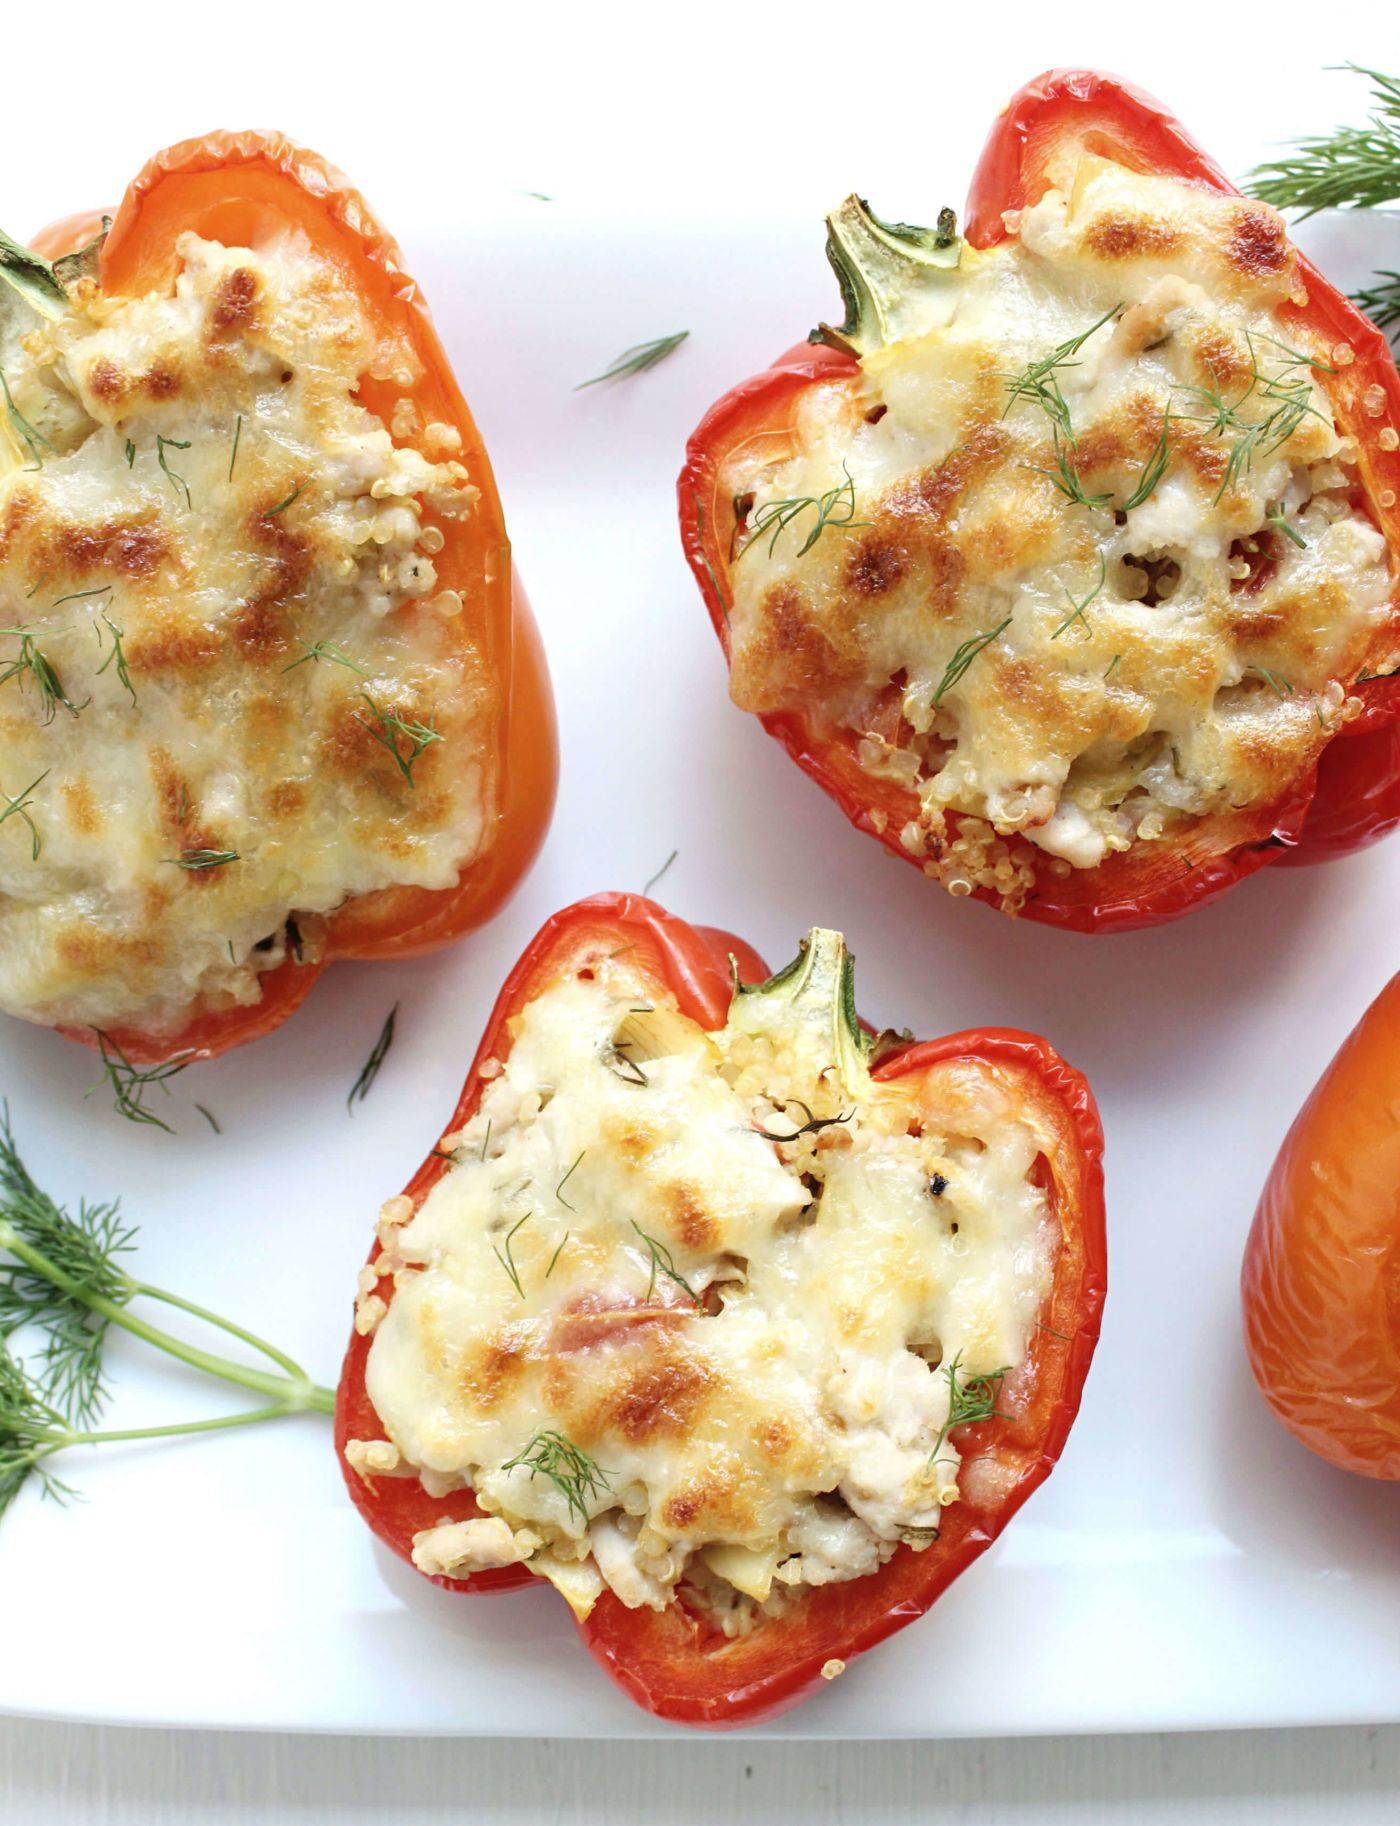 21 Of the Best Ideas for Easy Healthy Dinners for Two - Best Recipes